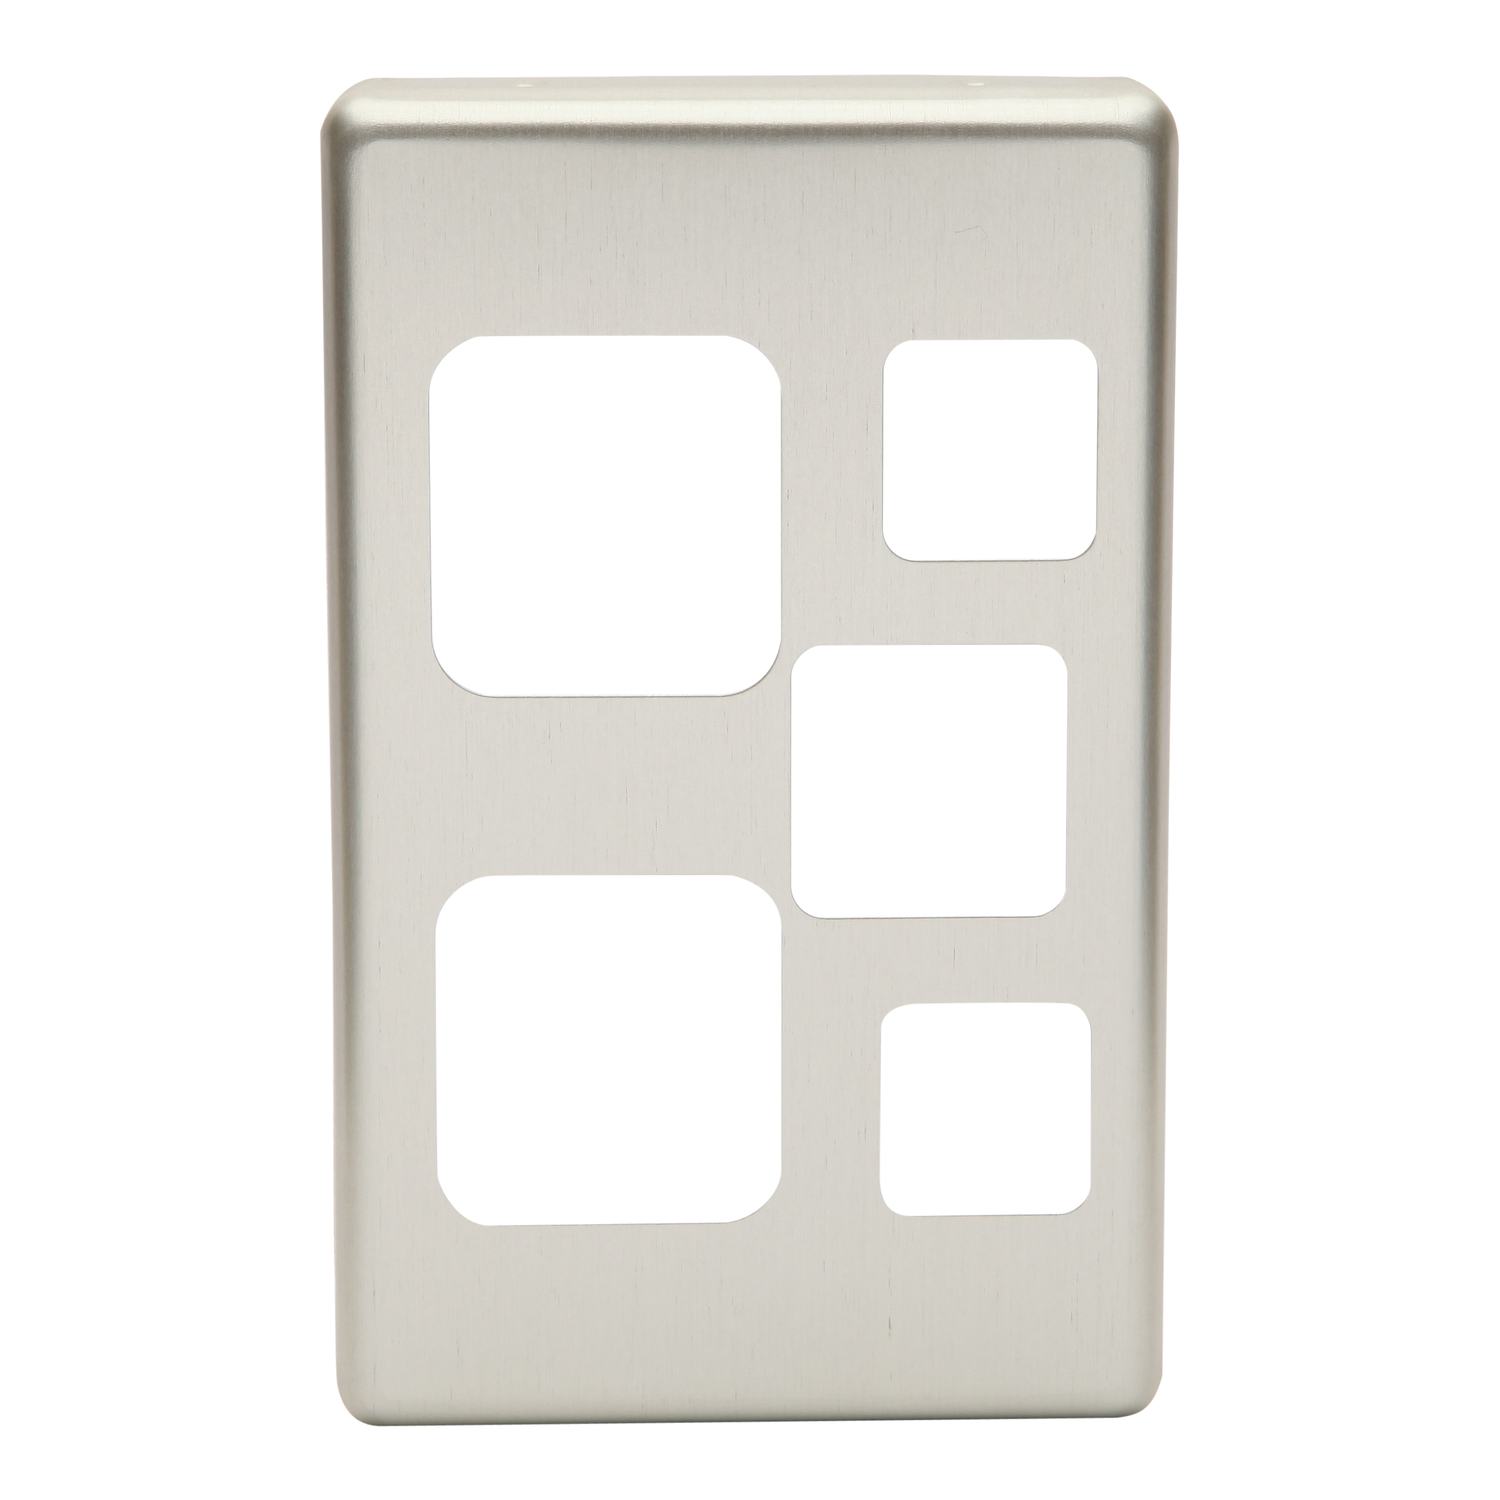 Clip-On Socket Cover Plate For Vertical Double Switch Socket, Stainless Steel